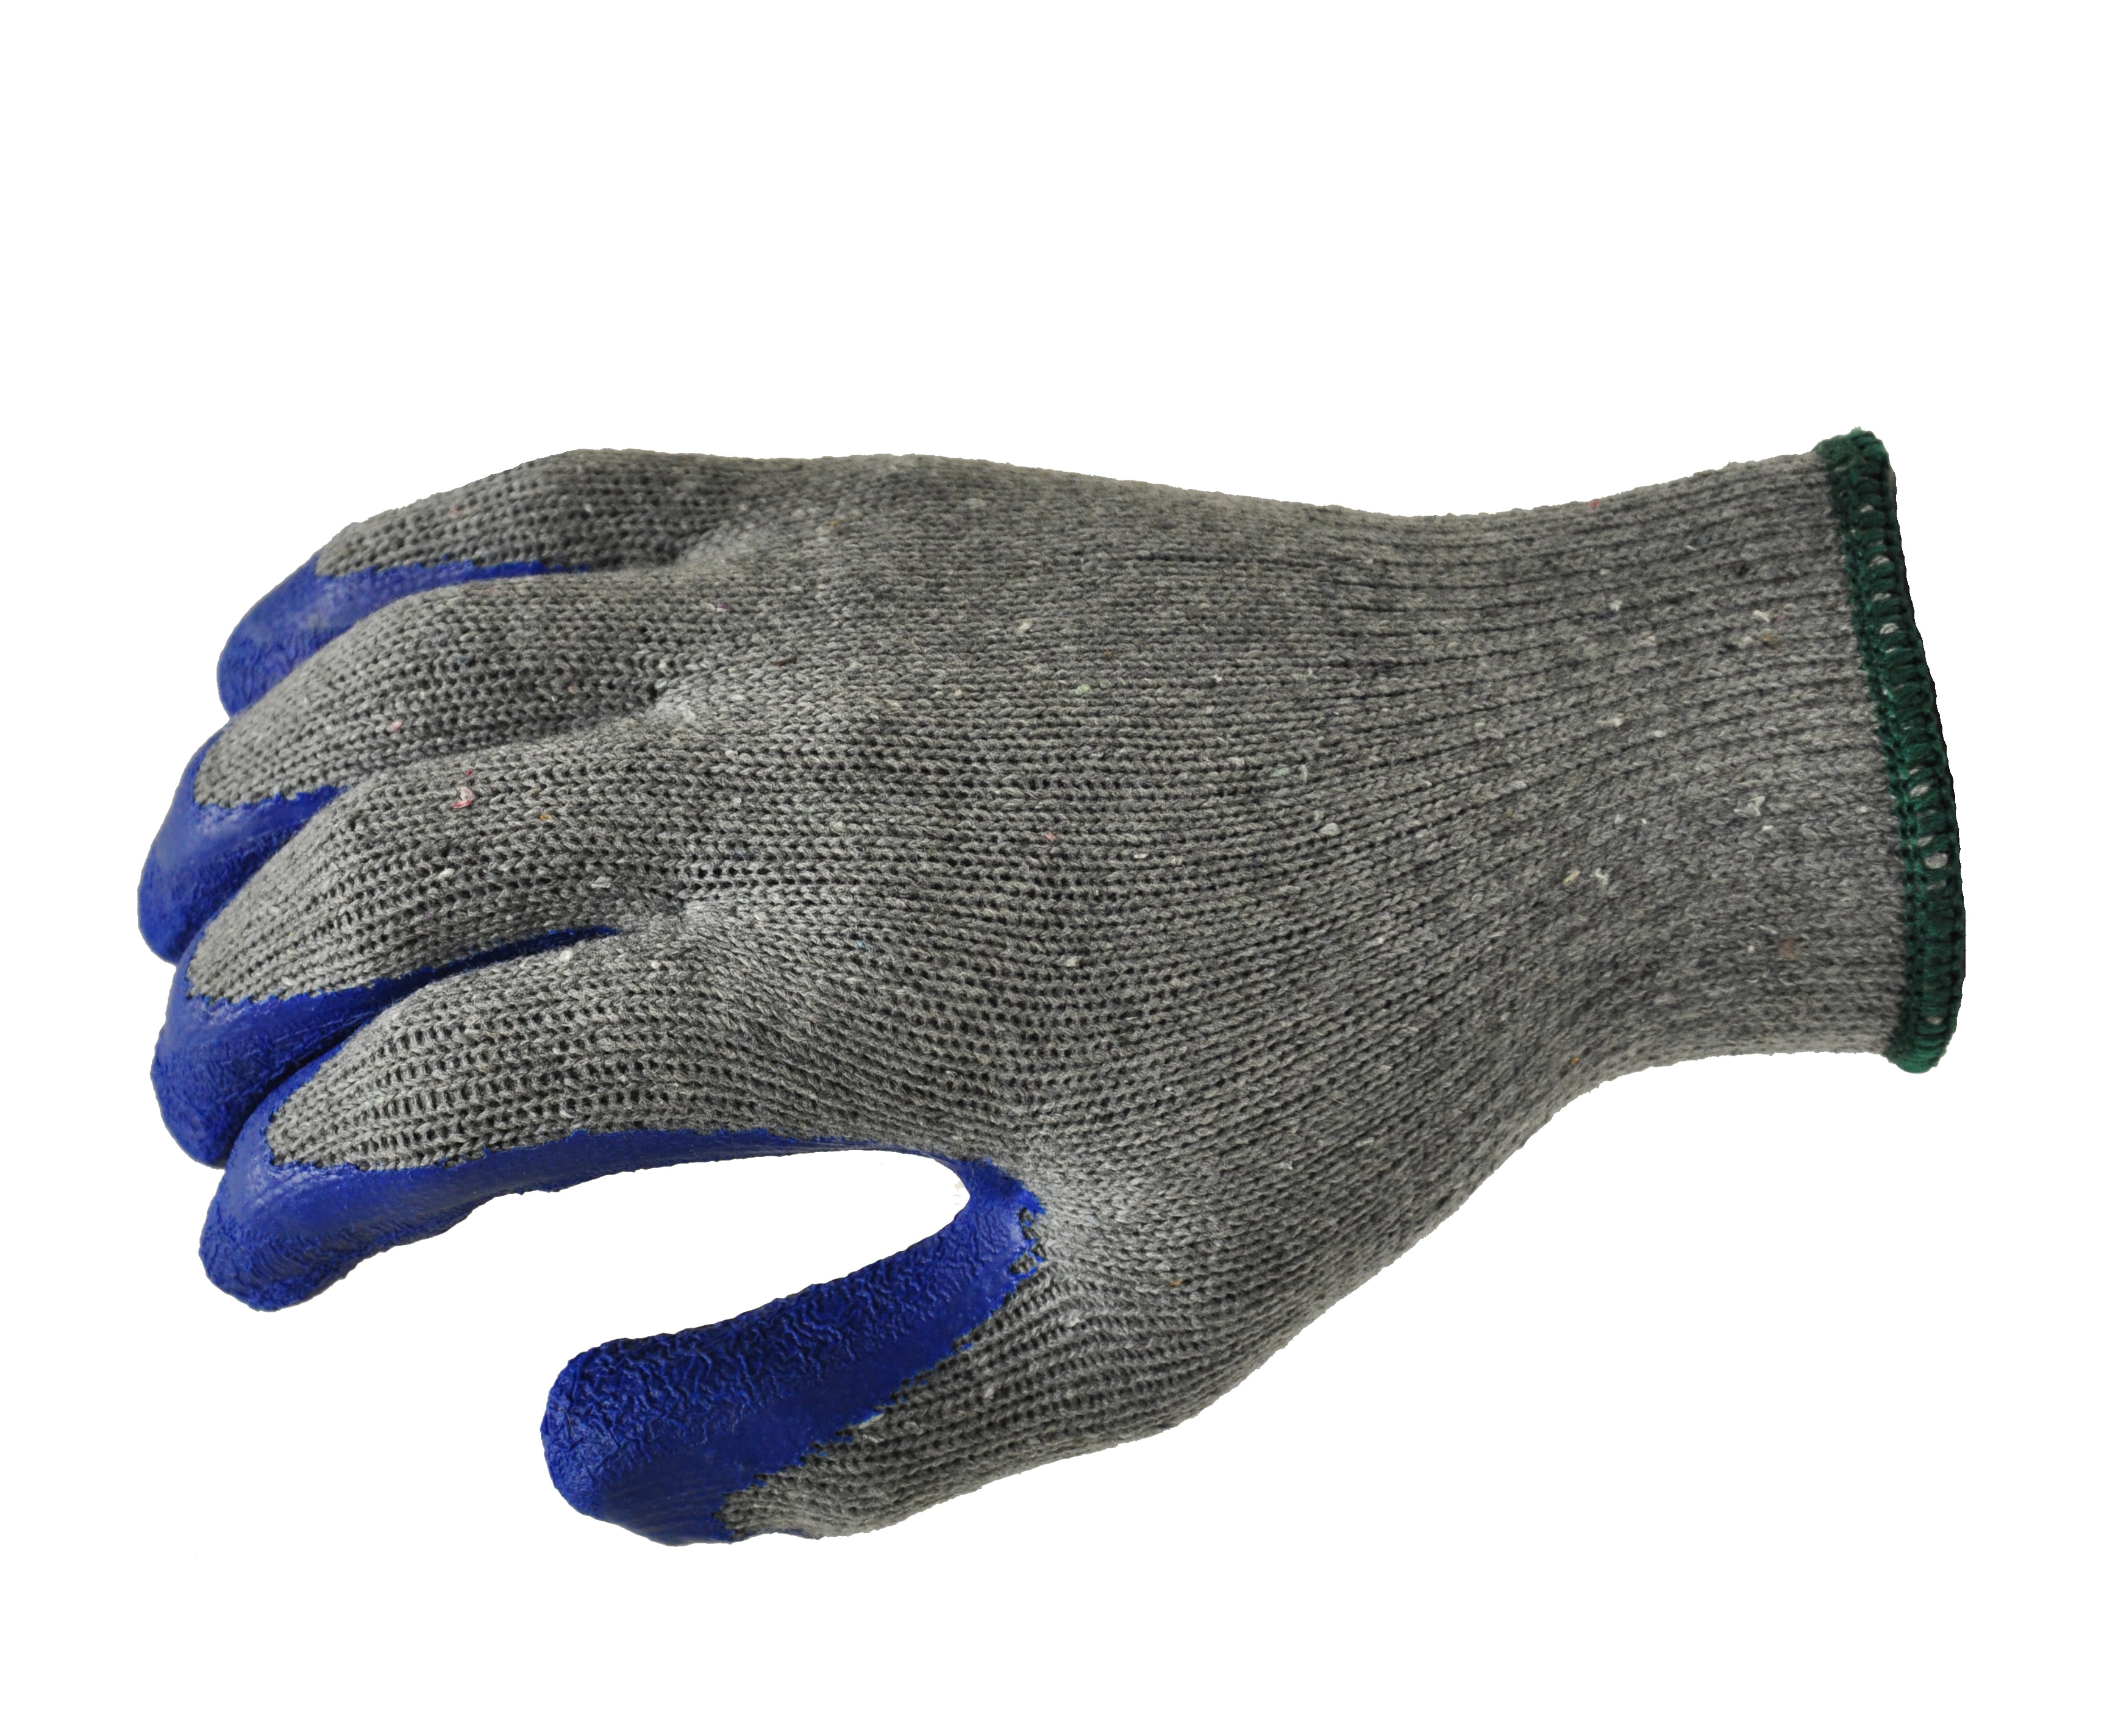 G & F Products Rubber Latex Coated Work Gloves for Construction, Blue,  Crinkle Pattern, small (Sold by dozen, 12 Pairs) (1511S-DZ)